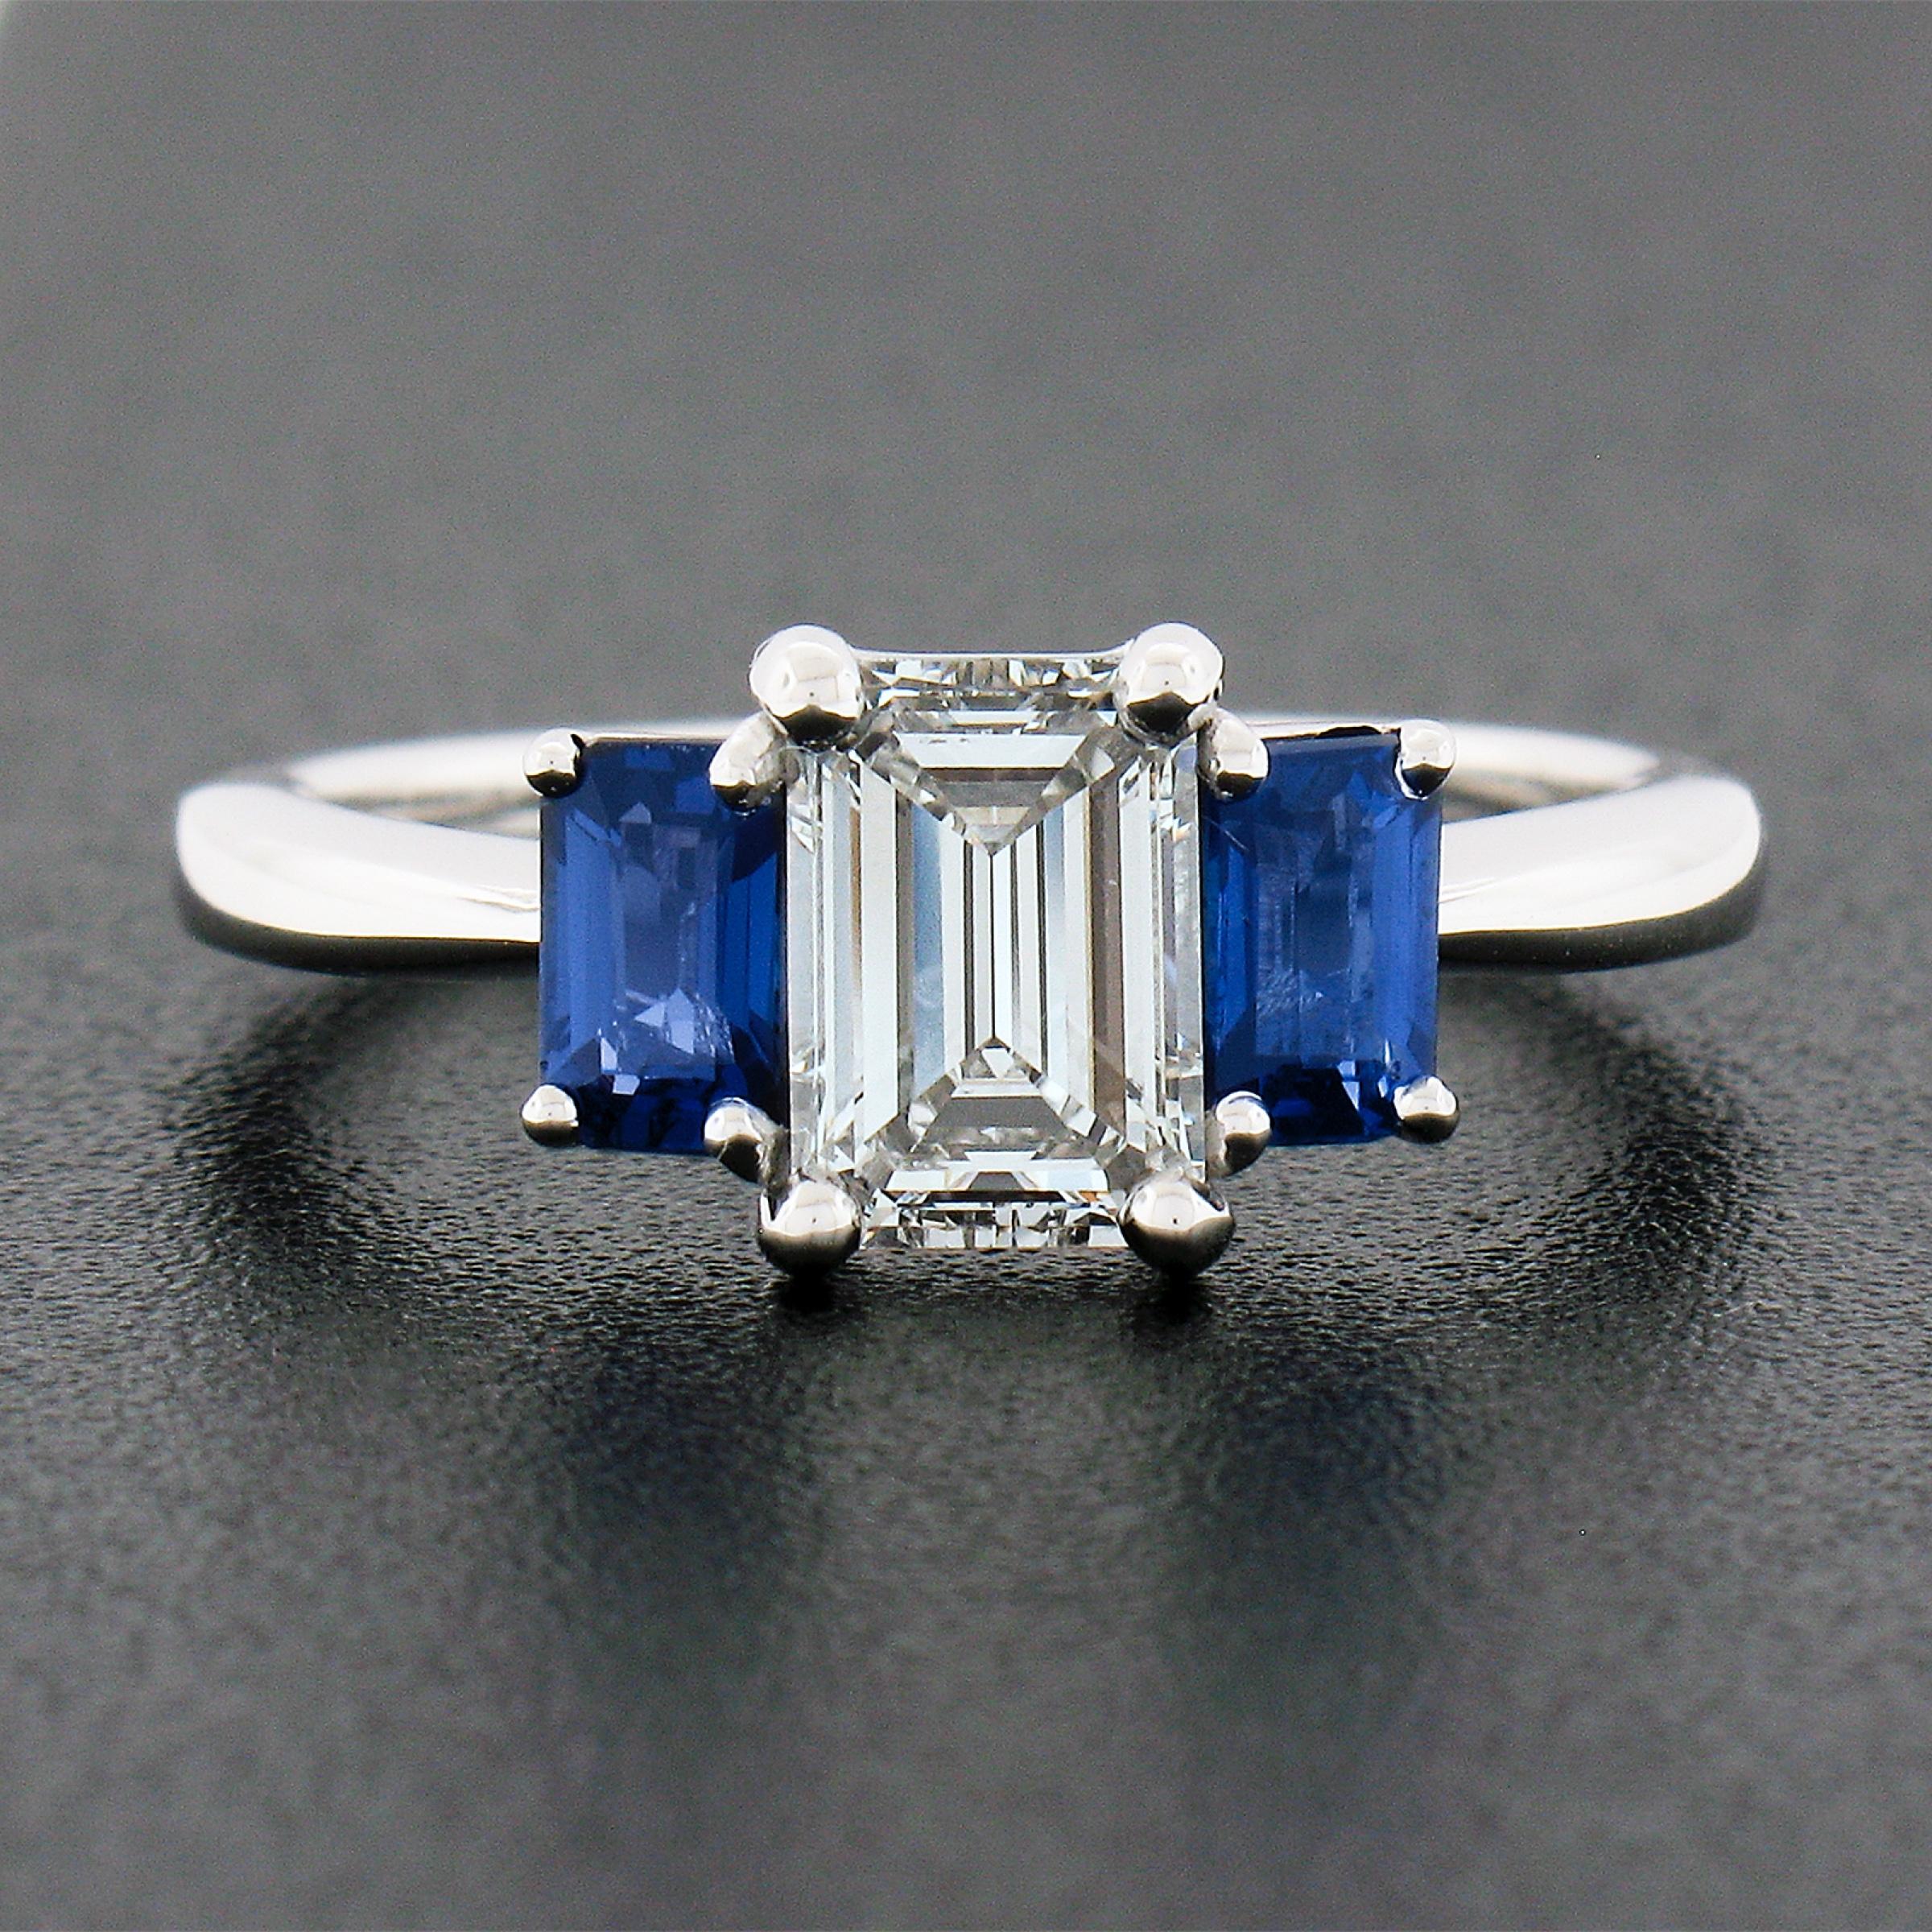 New Platinum 1.71ctw GIA Emerald Cut Diamond & Sapphire 3 Stone Engagement Ring In New Condition For Sale In Montclair, NJ